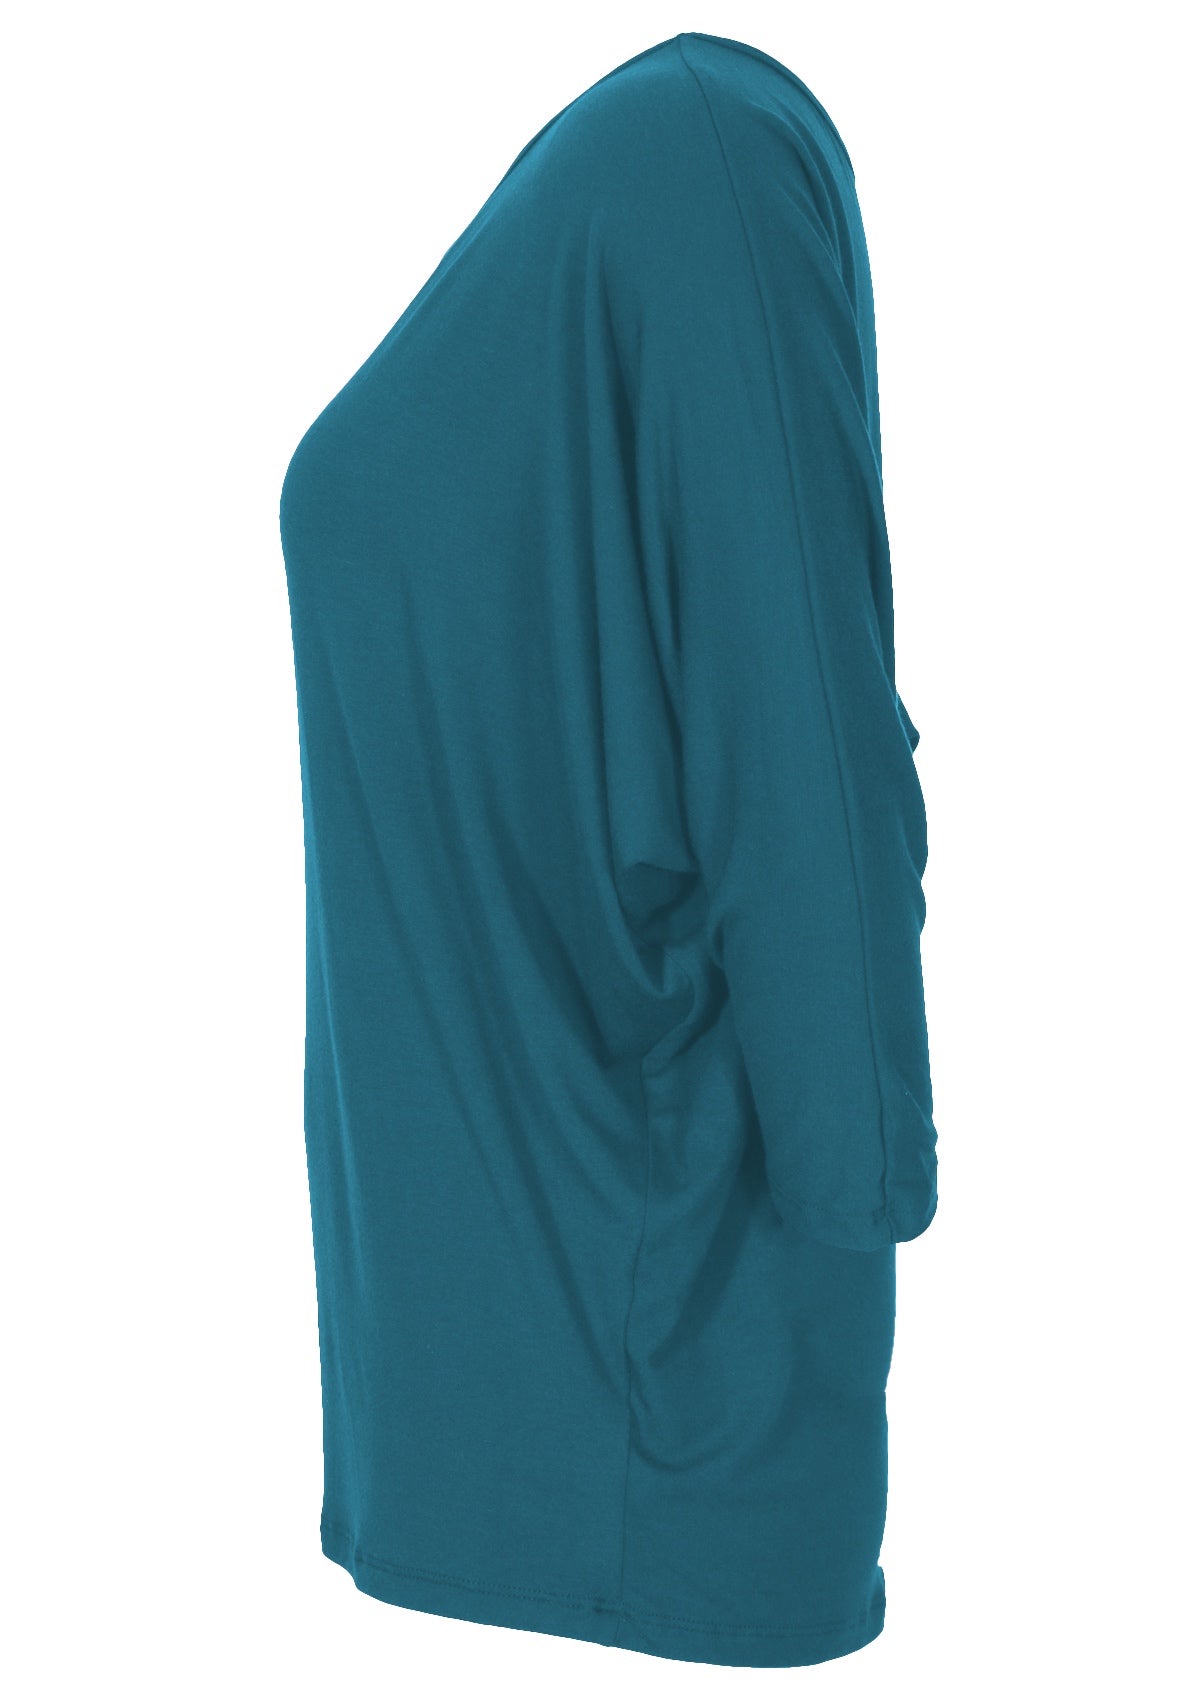 Side view of a women's 3/4 sleeve rayon batwing round neckline teal top.